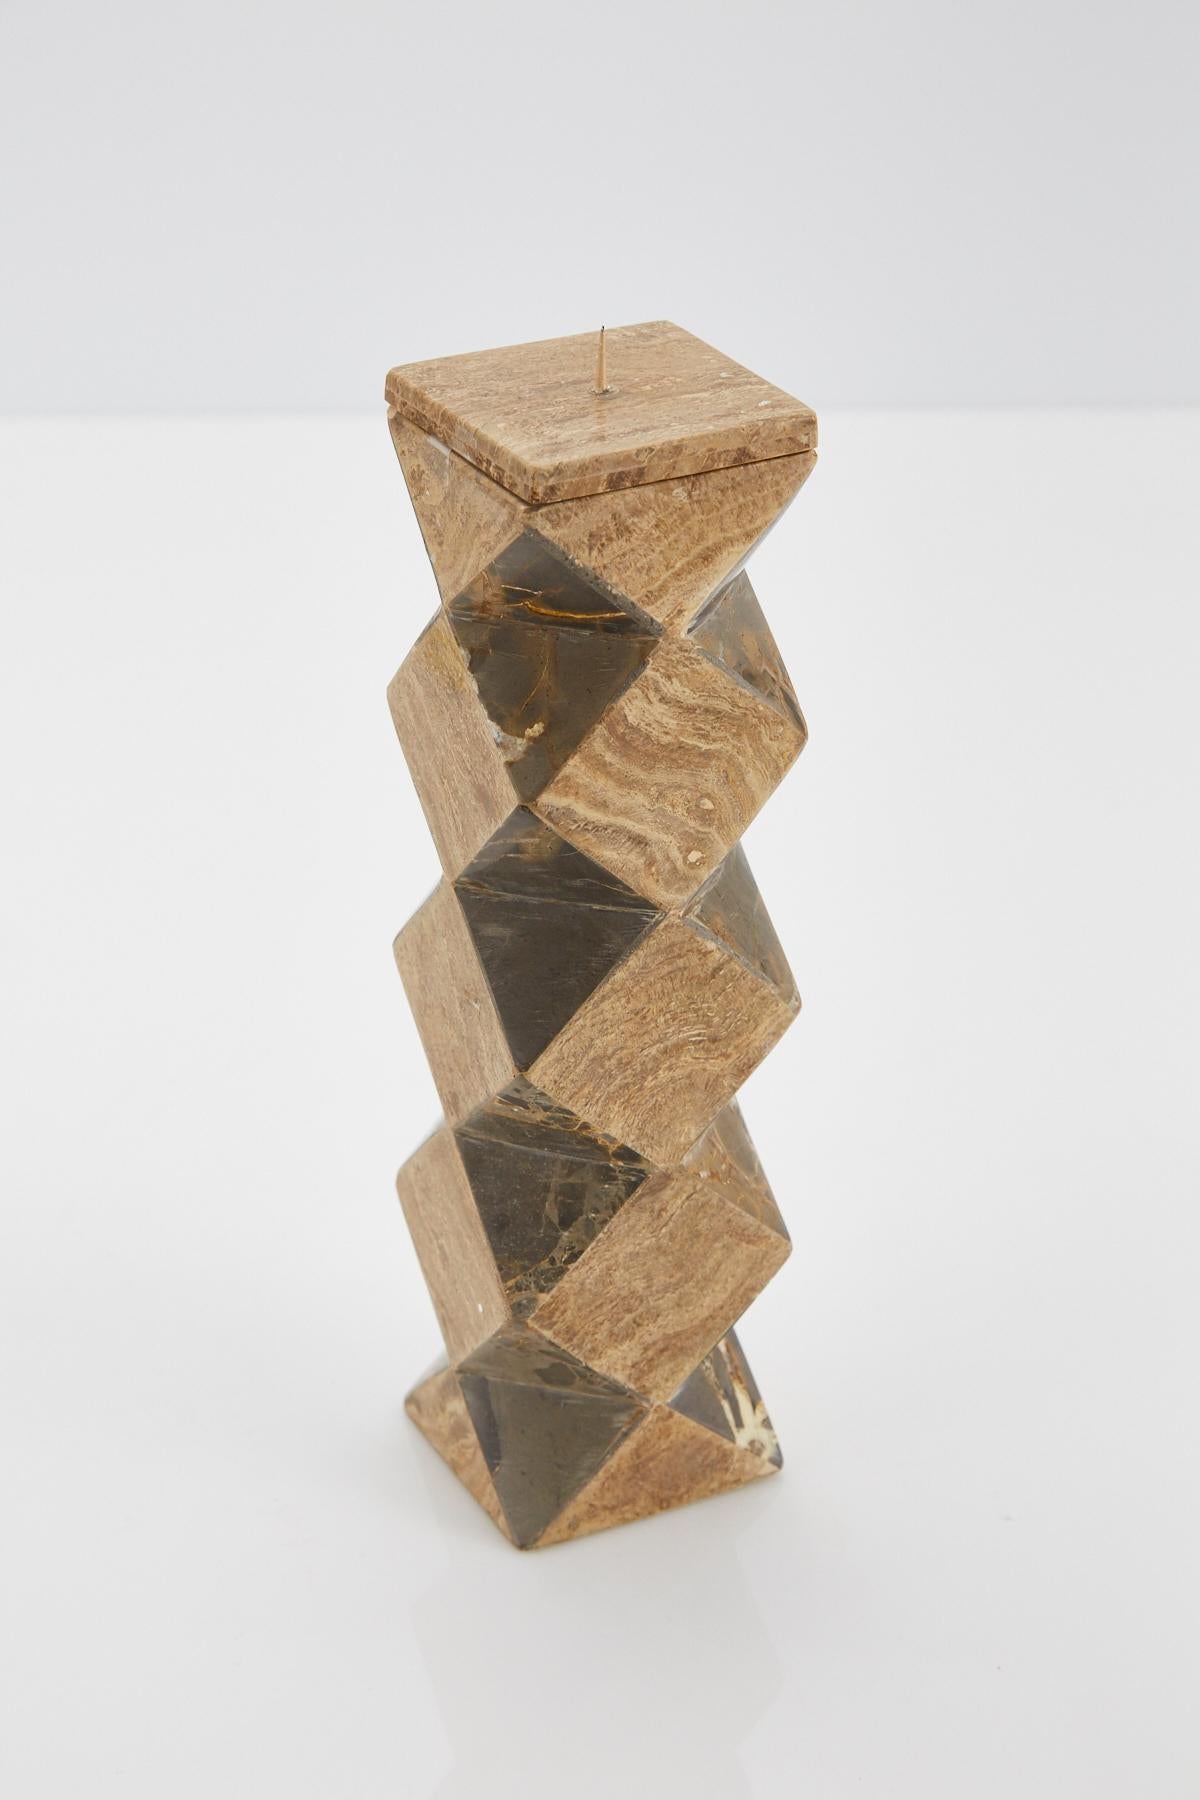 Convertible Faceted Postmodern Tessellated Stone Candlestick or Vase, 1990s (Stein) im Angebot